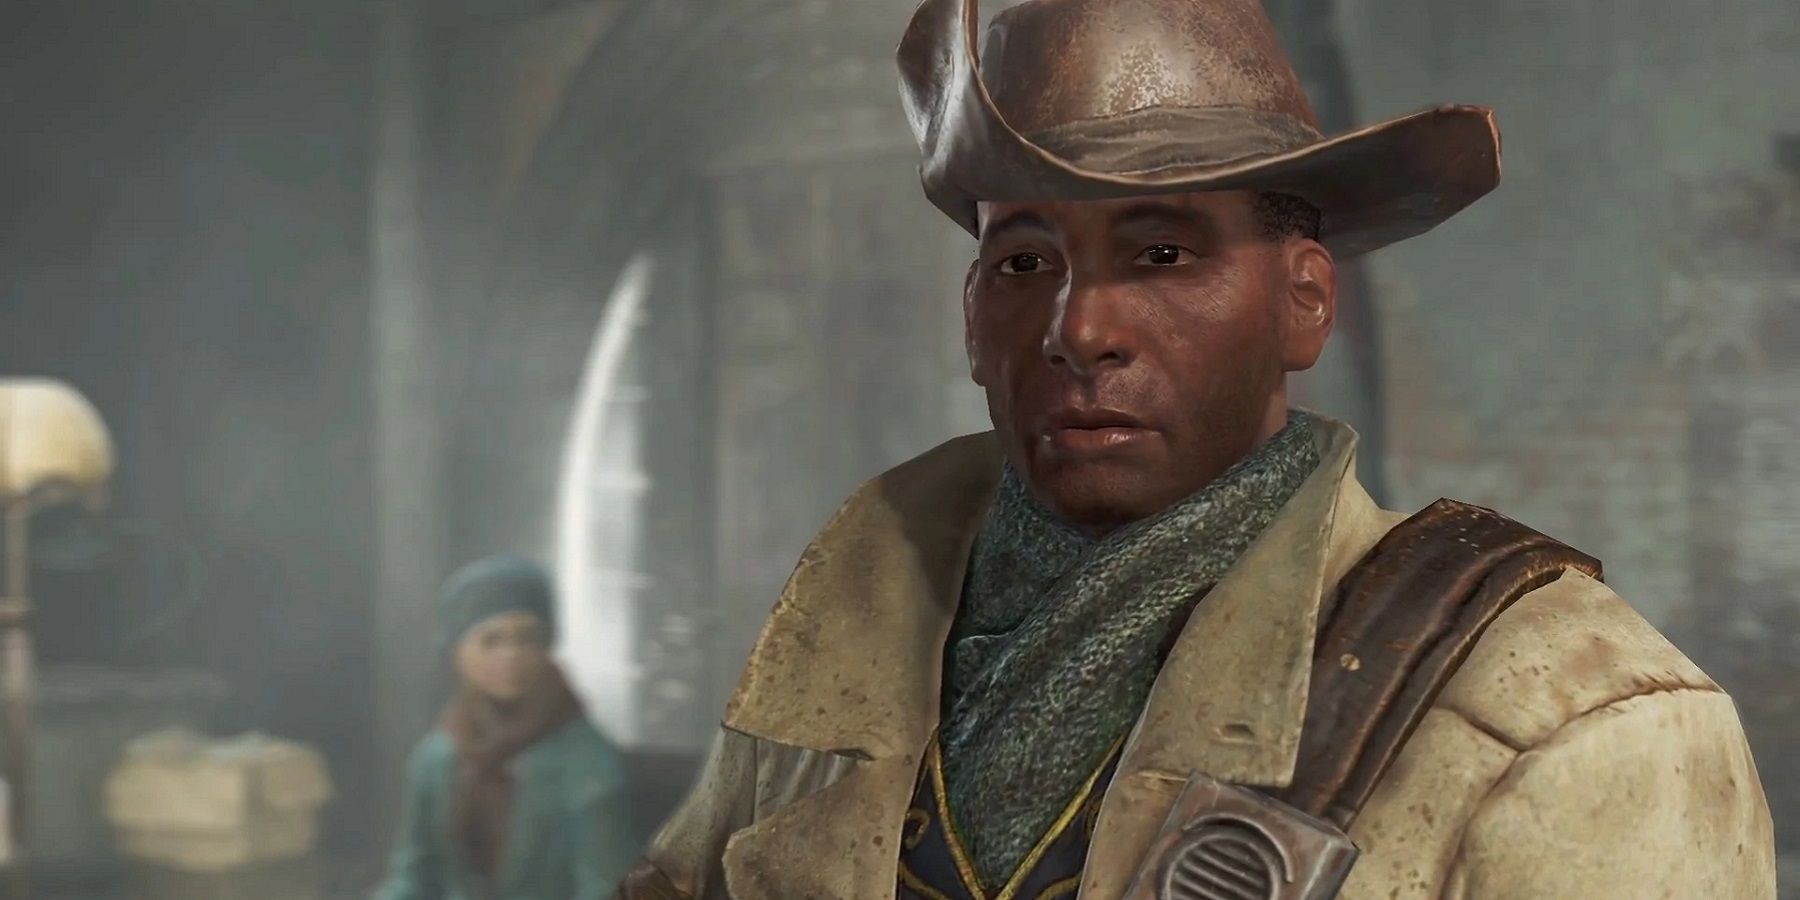 Screenshot from Fallout 4 showing a close up of Preston Garvey.